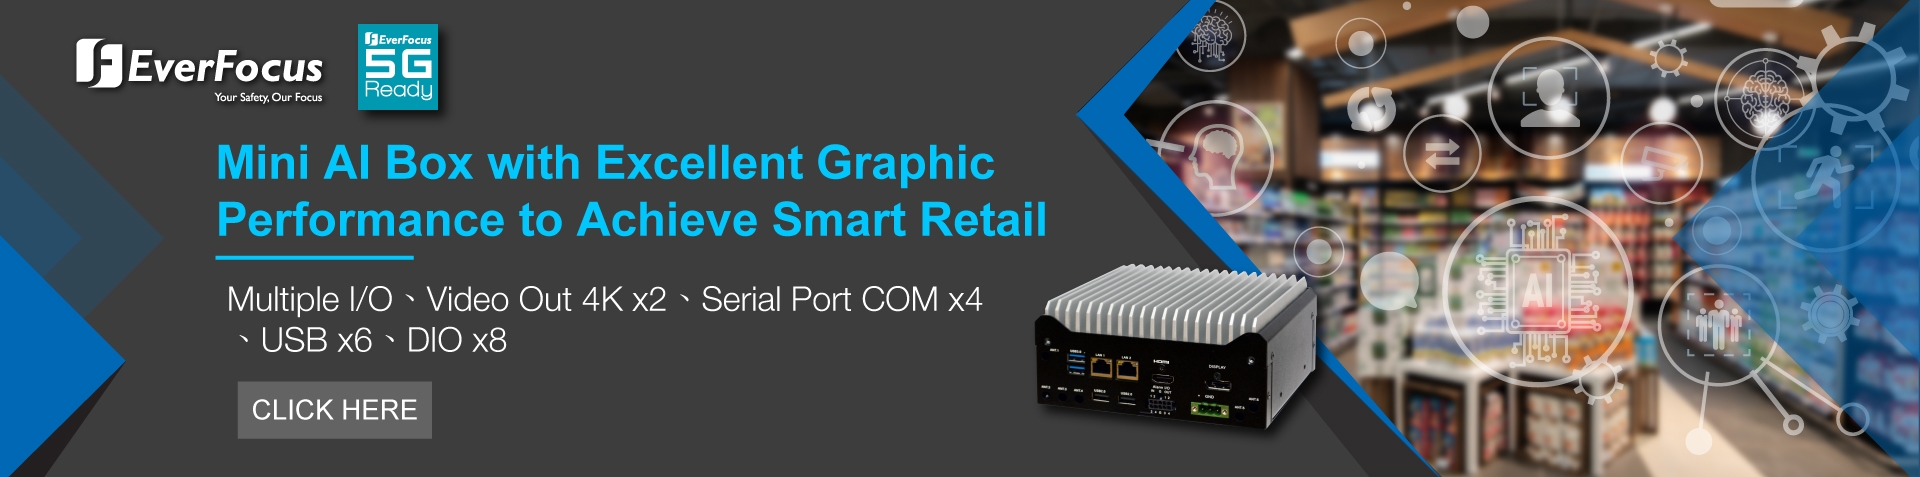 Mini AI Box with Excellent Graphic Performance to Achieve Smart Retail